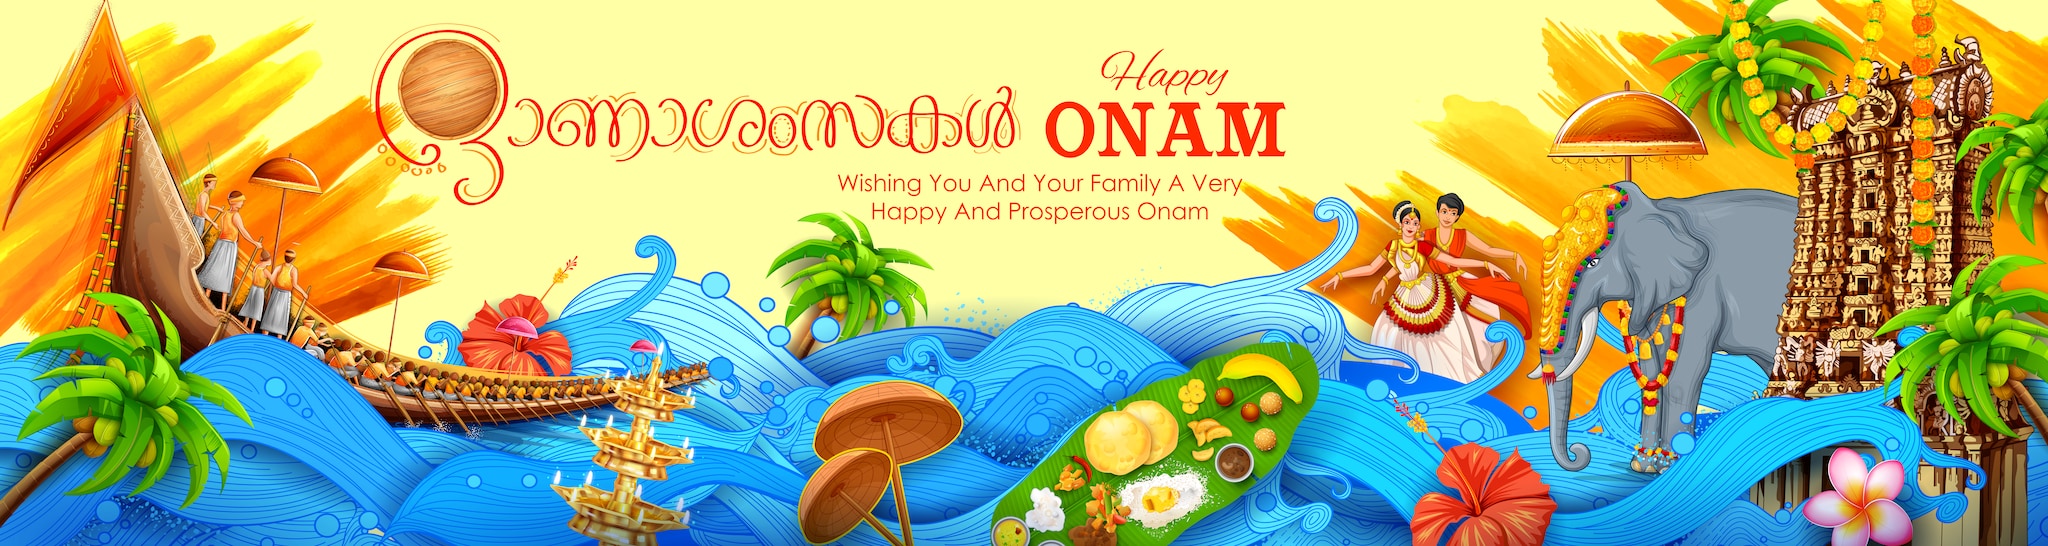 Happy Onam 2022 Wallpaper, Wishes Images, Quotes, Status, Photos, Pics, SMS and Messages to share. (Image: Shutterstock) 